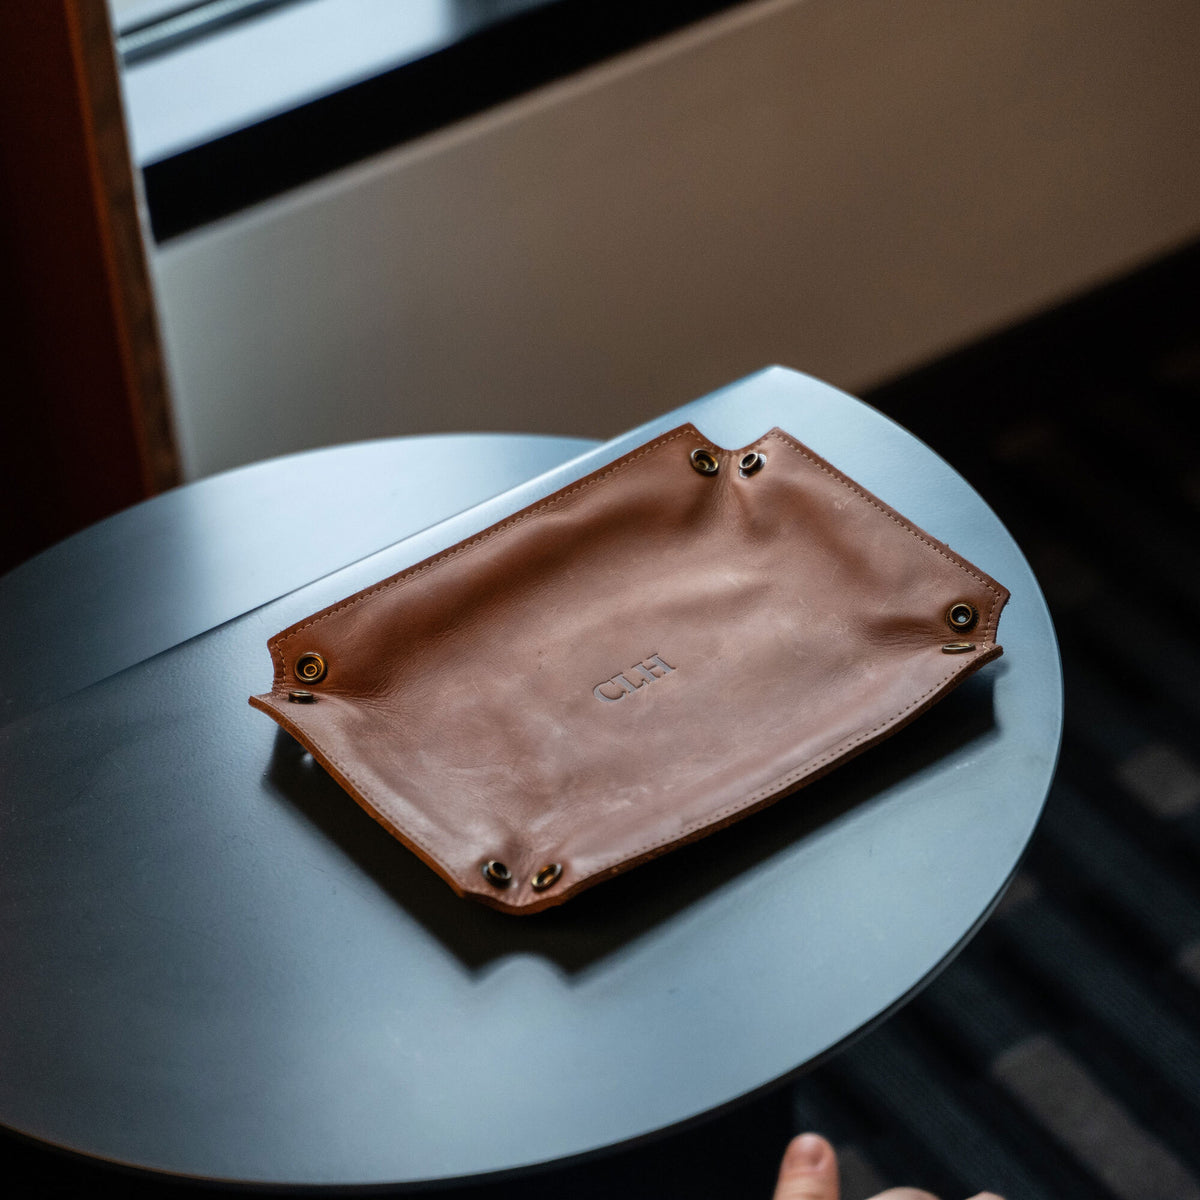 The Jetsetter - Personalized Full-Grain Leather Travel Caddy